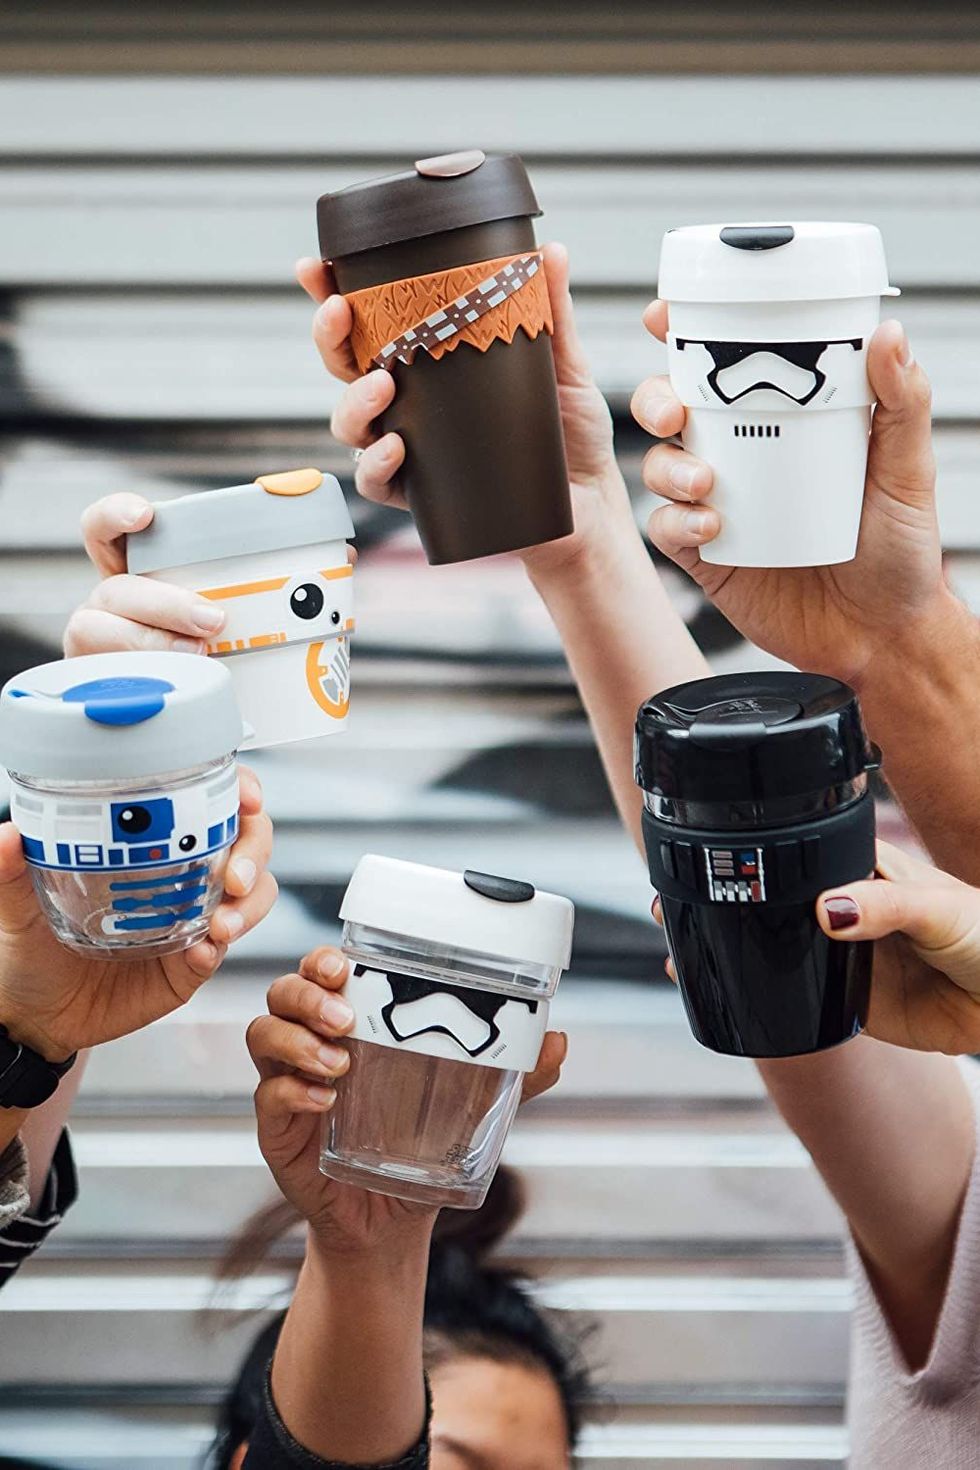 https://hips.hearstapps.com/vader-prod.s3.amazonaws.com/1589363352-keepcup-star-wars-reusable-coffee-cup-1589363335.jpg?crop=0.6666666666666666xw:1xh;center,top&resize=980:*